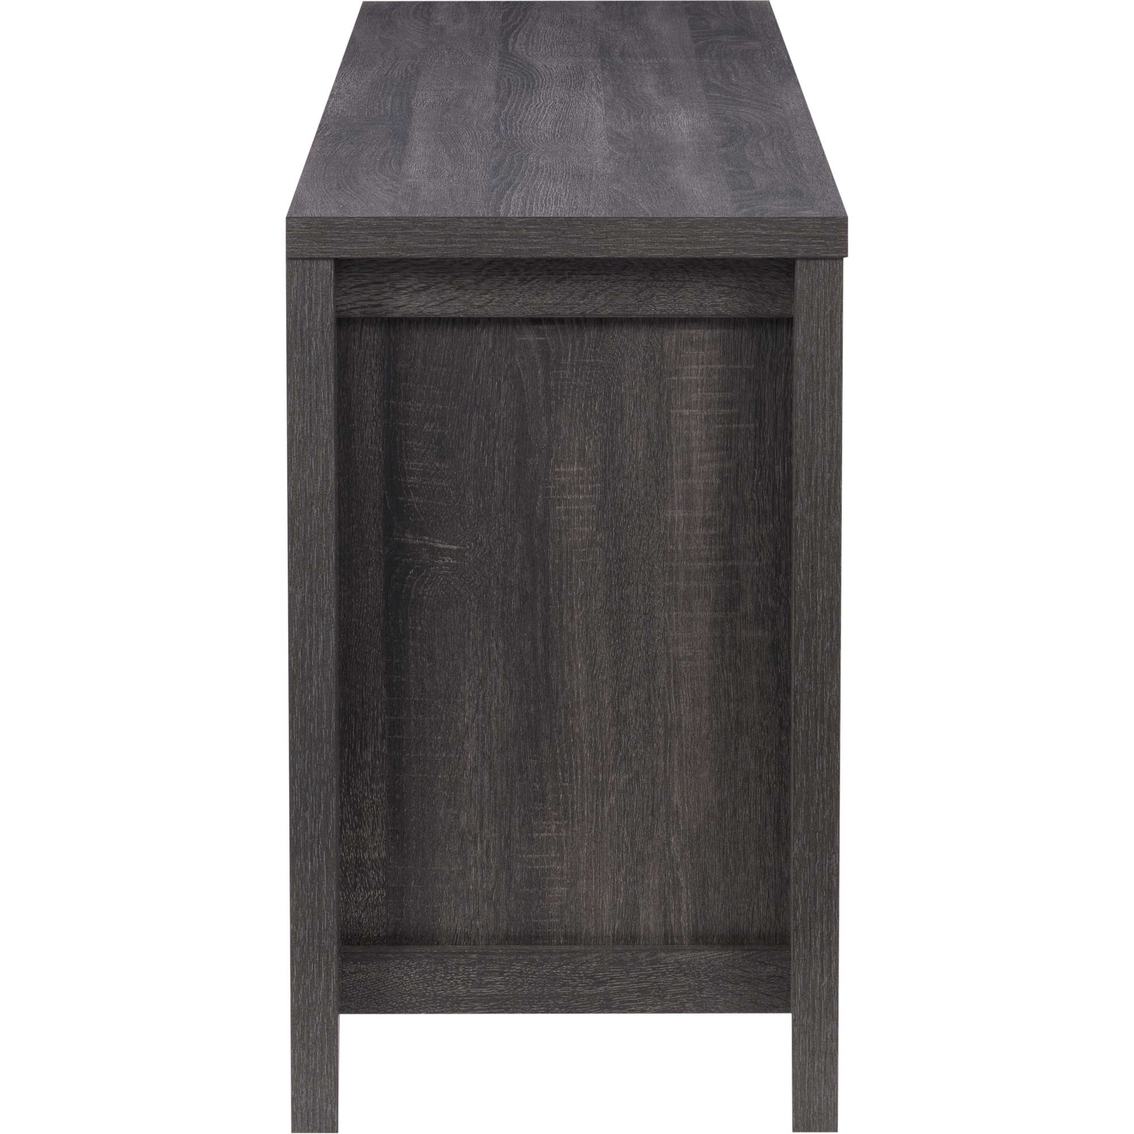 Corliving Hollywood Dark Grey TV Cabinet with Drawers for TVs up to 85 in. - Image 4 of 8